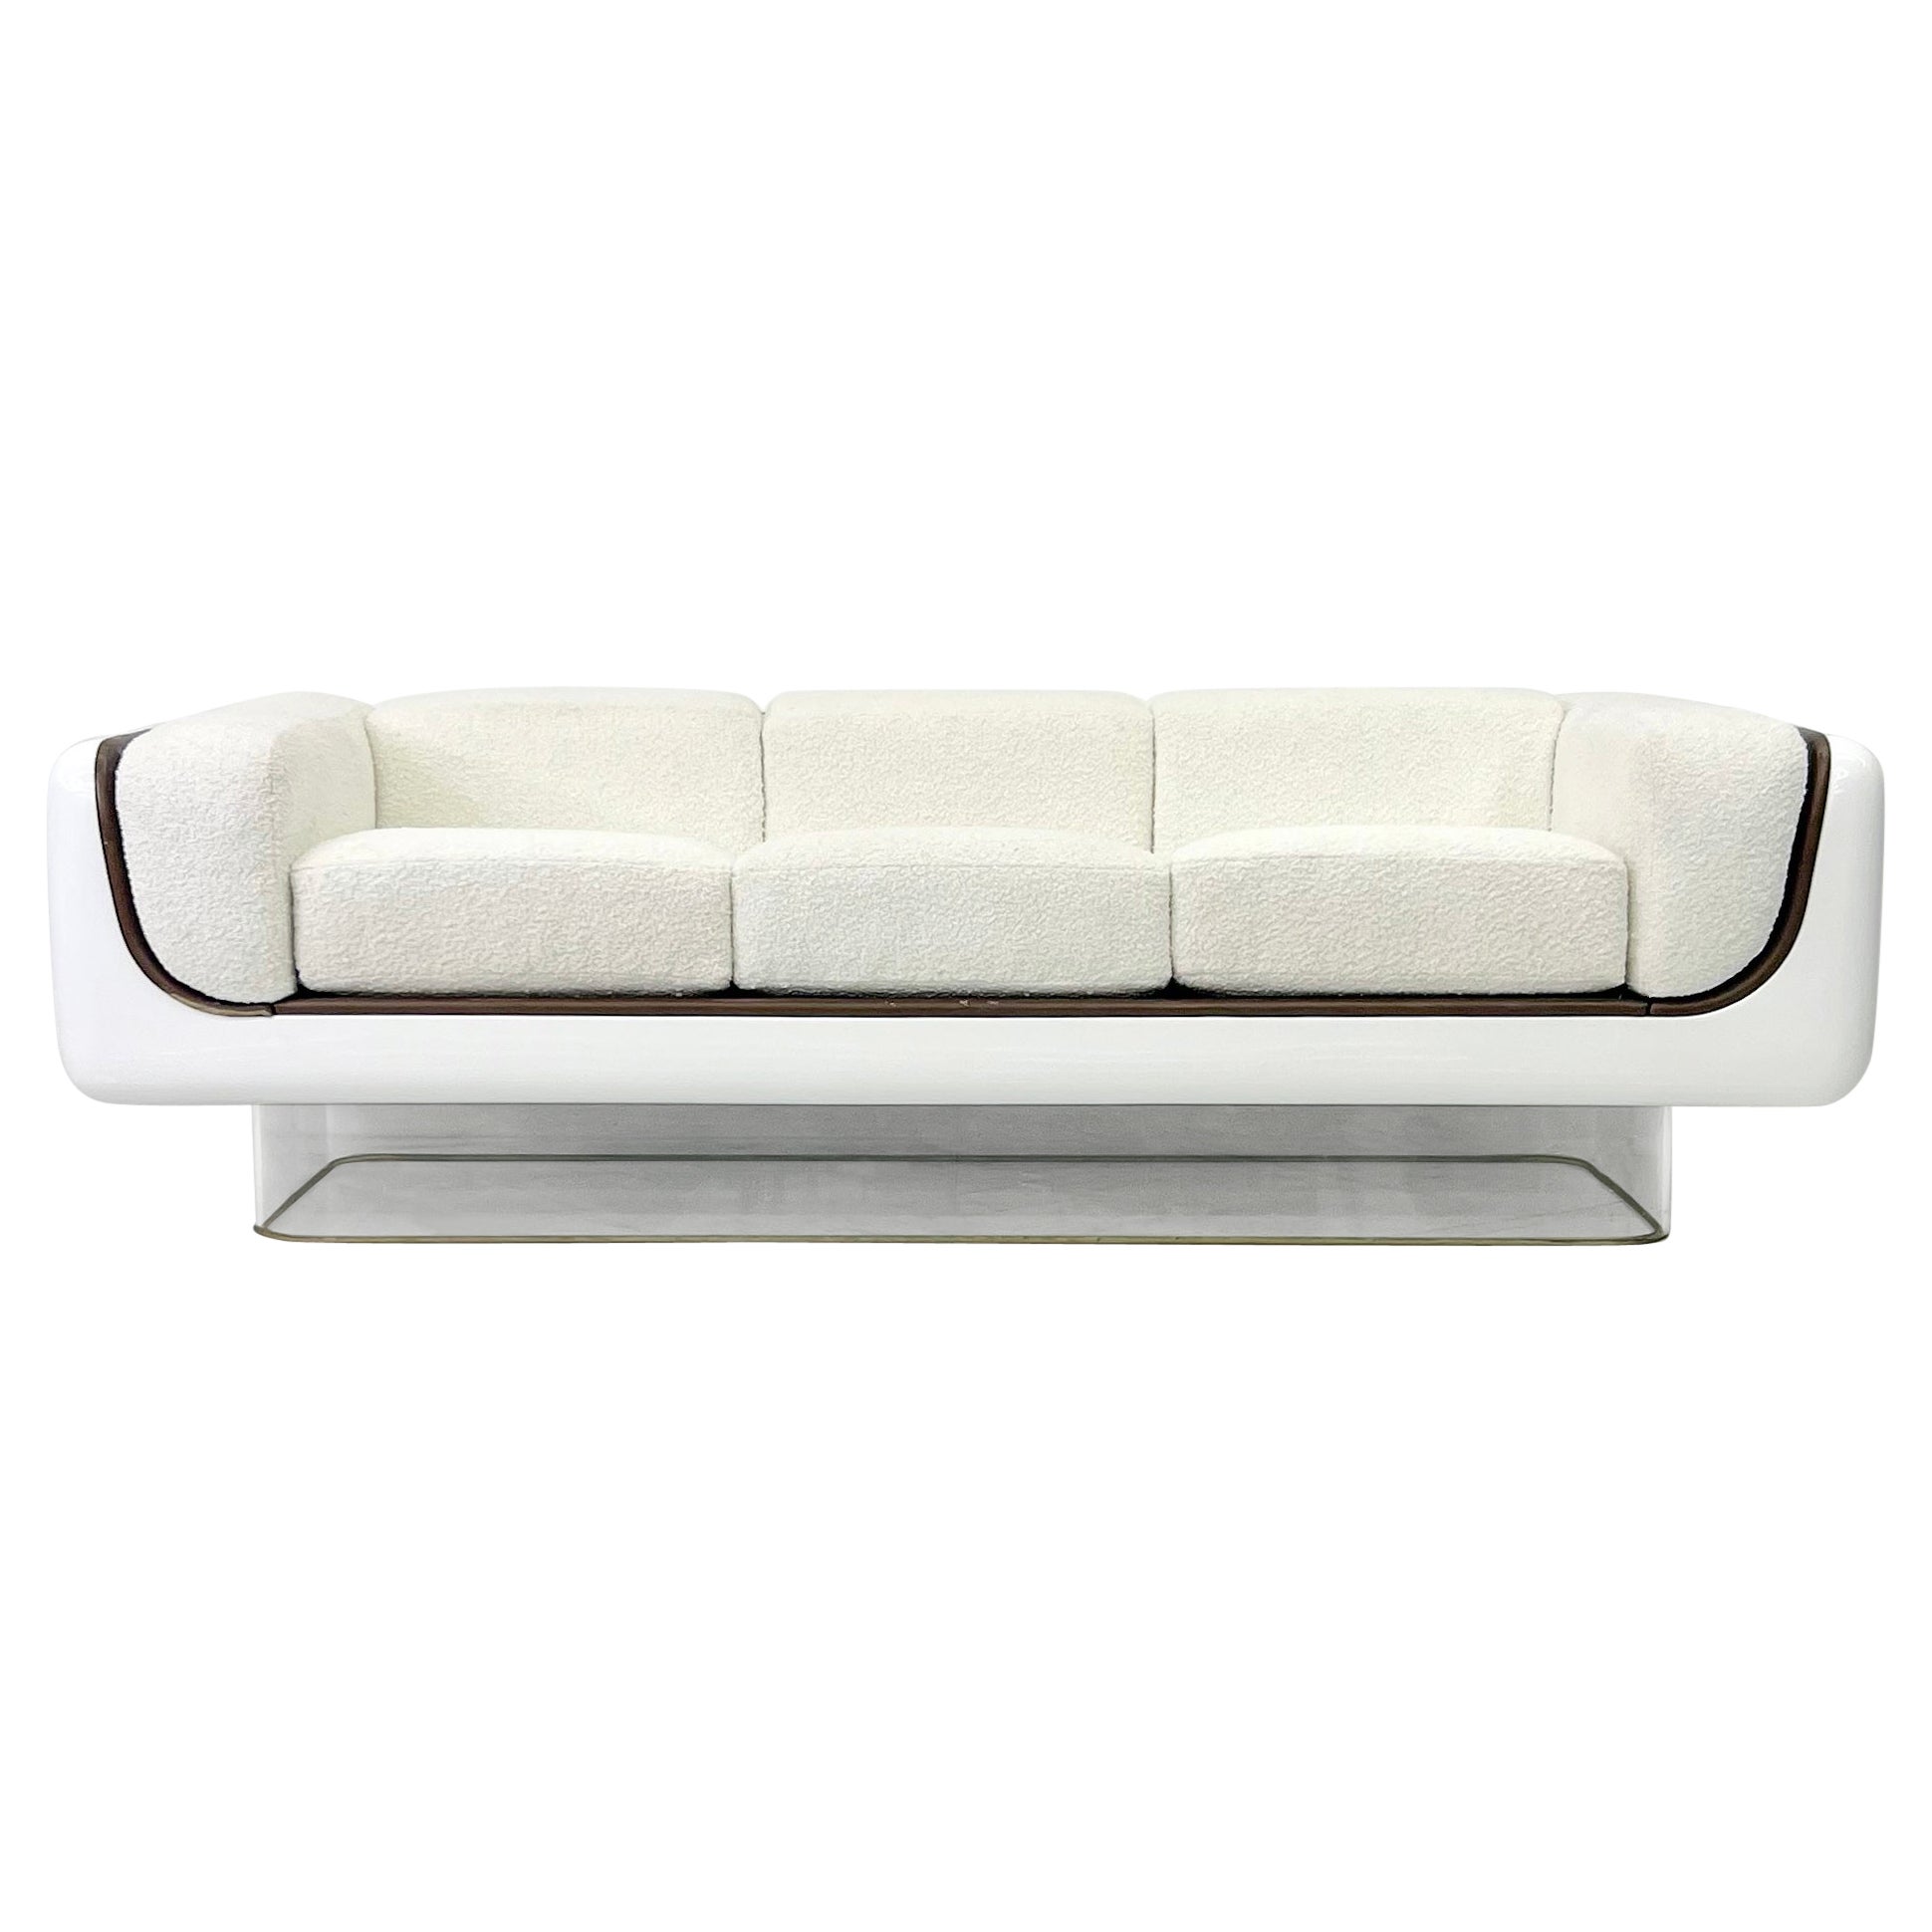 William Andrus for Steelcase Space Age, Sofa, White Bouclé and Leather, 1970s